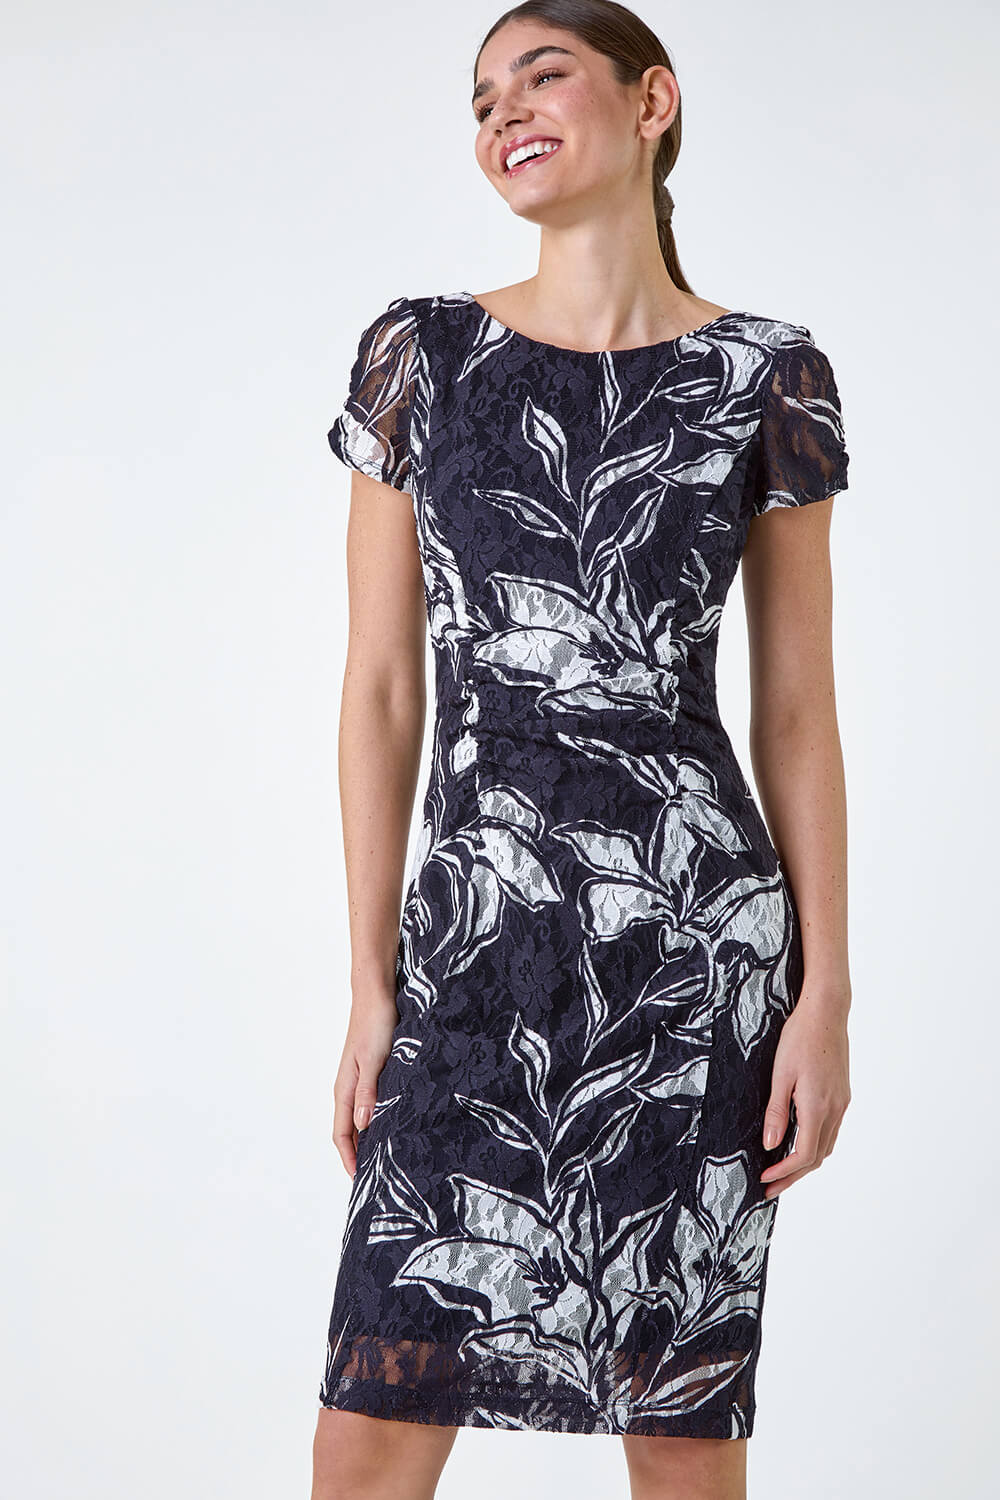 Navy  Floral Print Lace Stretch Dress, Image 2 of 5